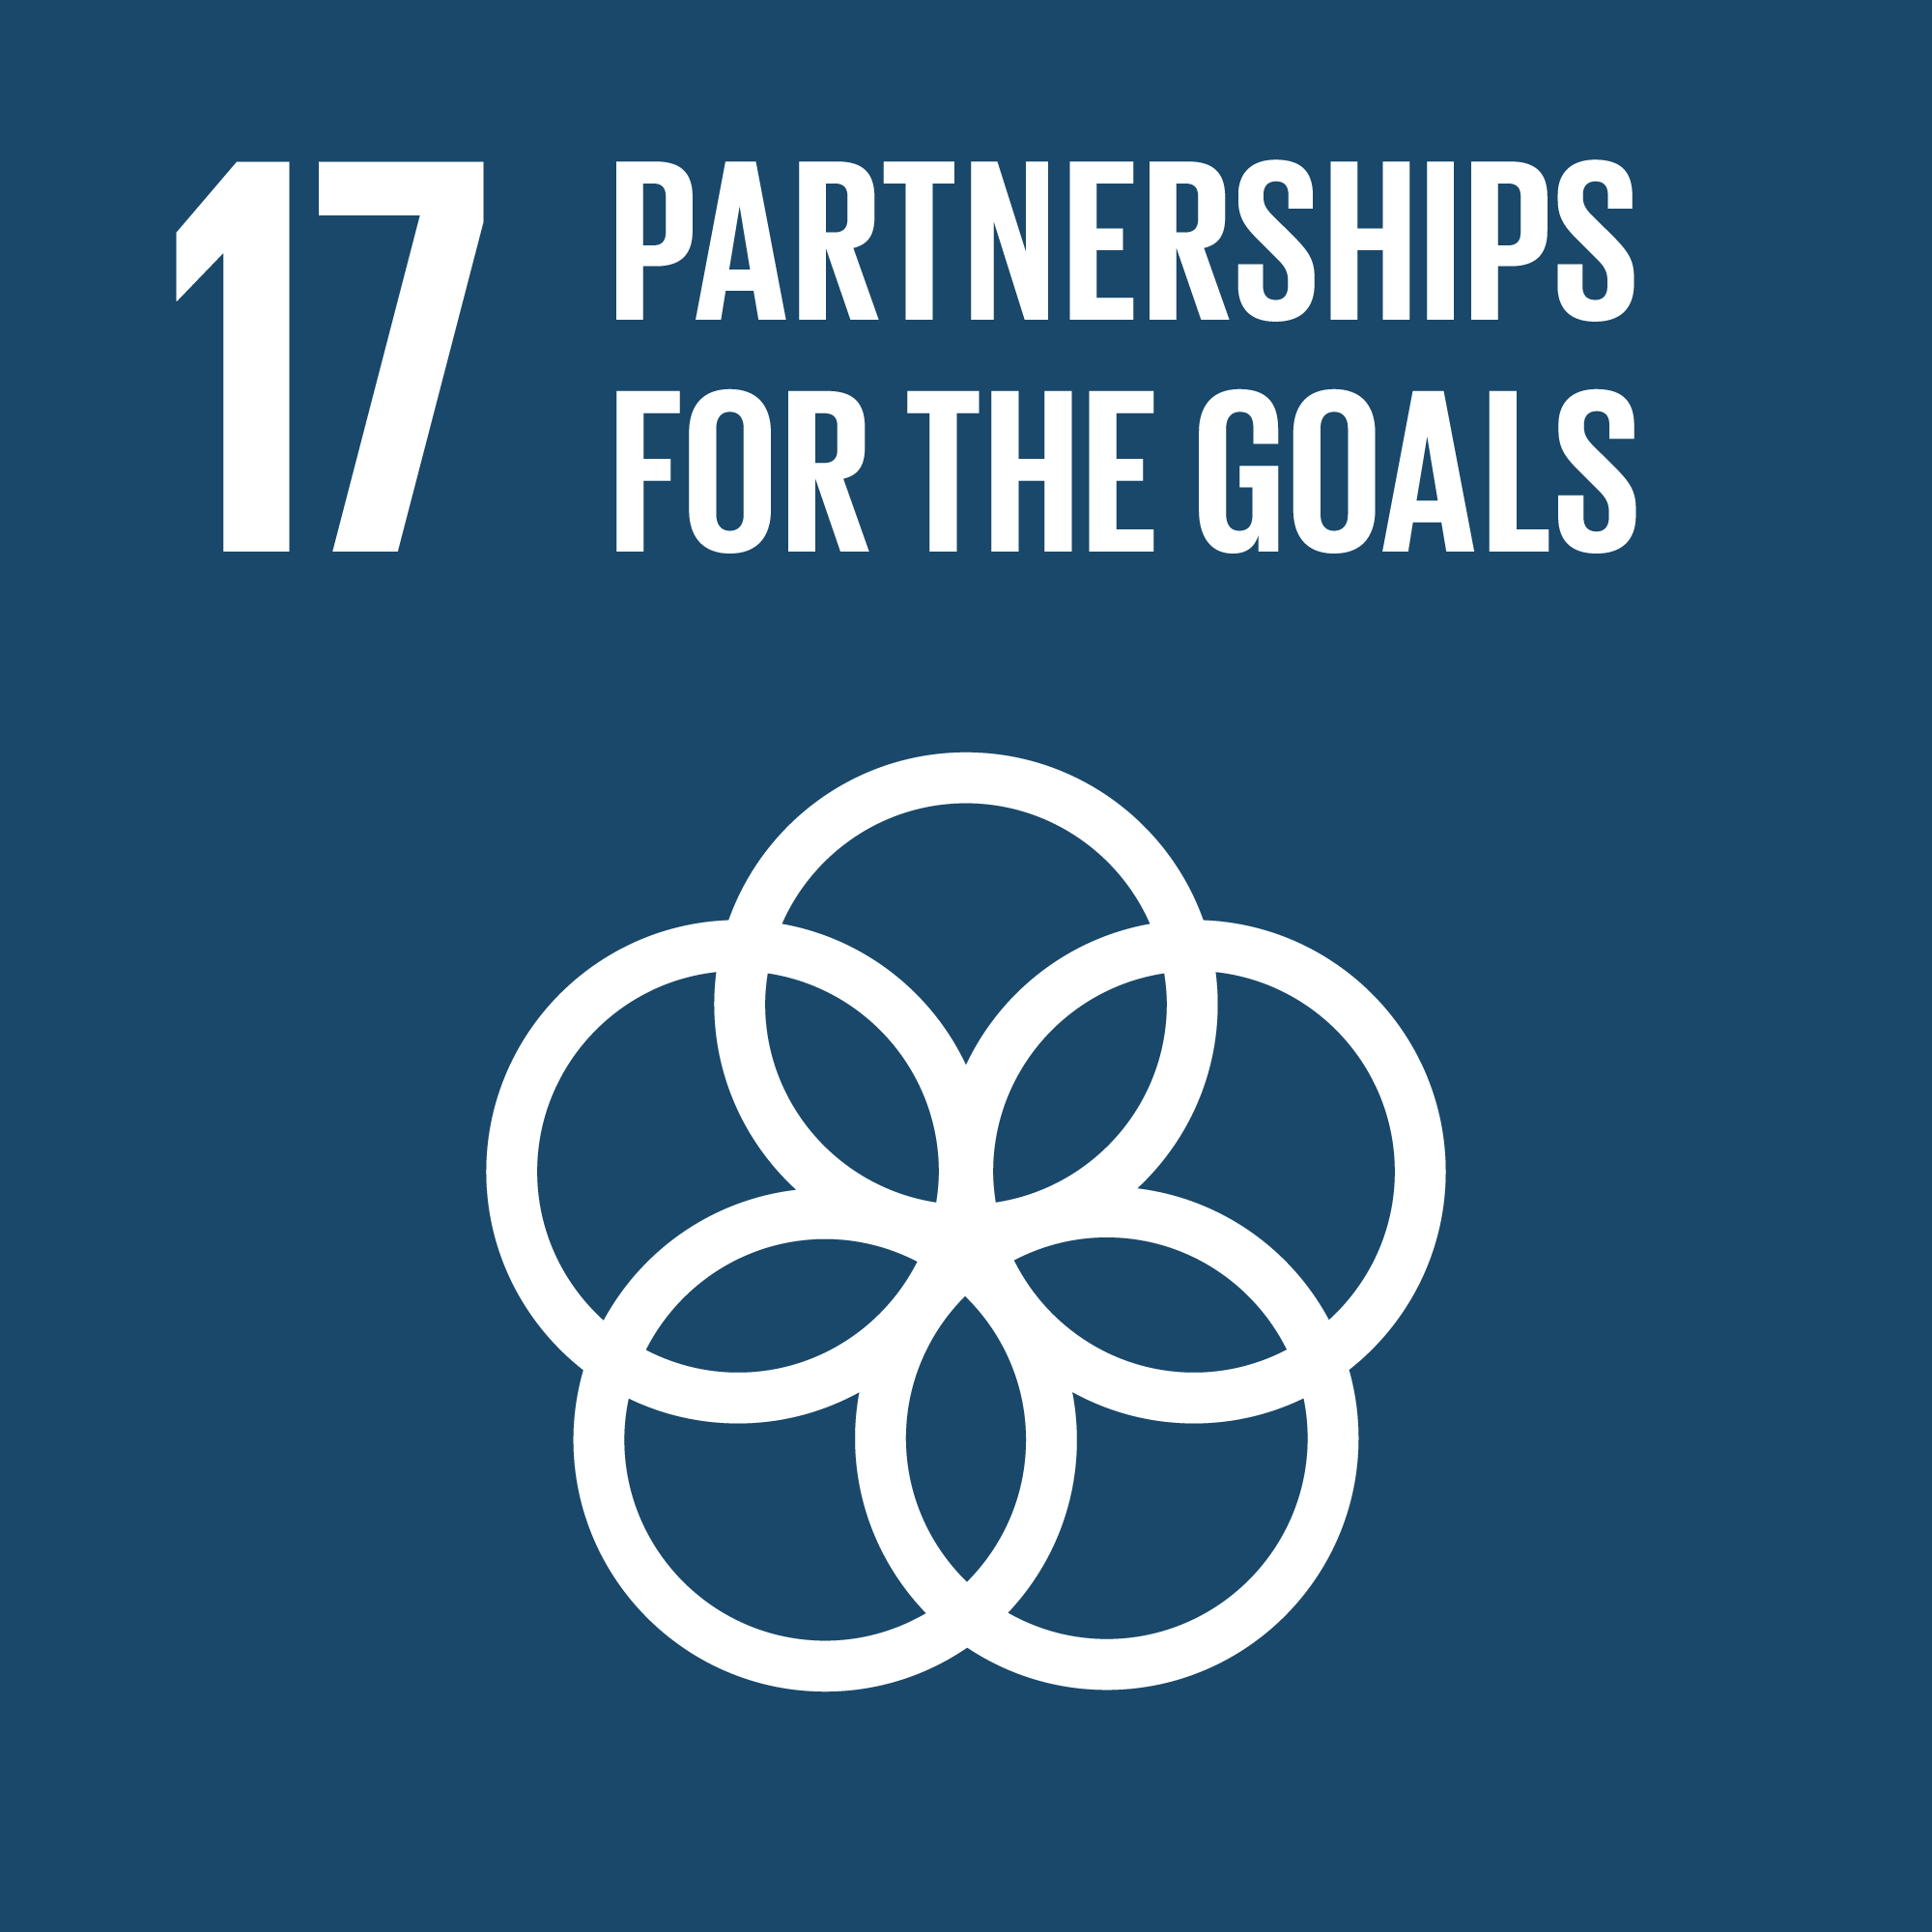 Go to https://www.globalgoals.org/17-partnerships-for-the-goals